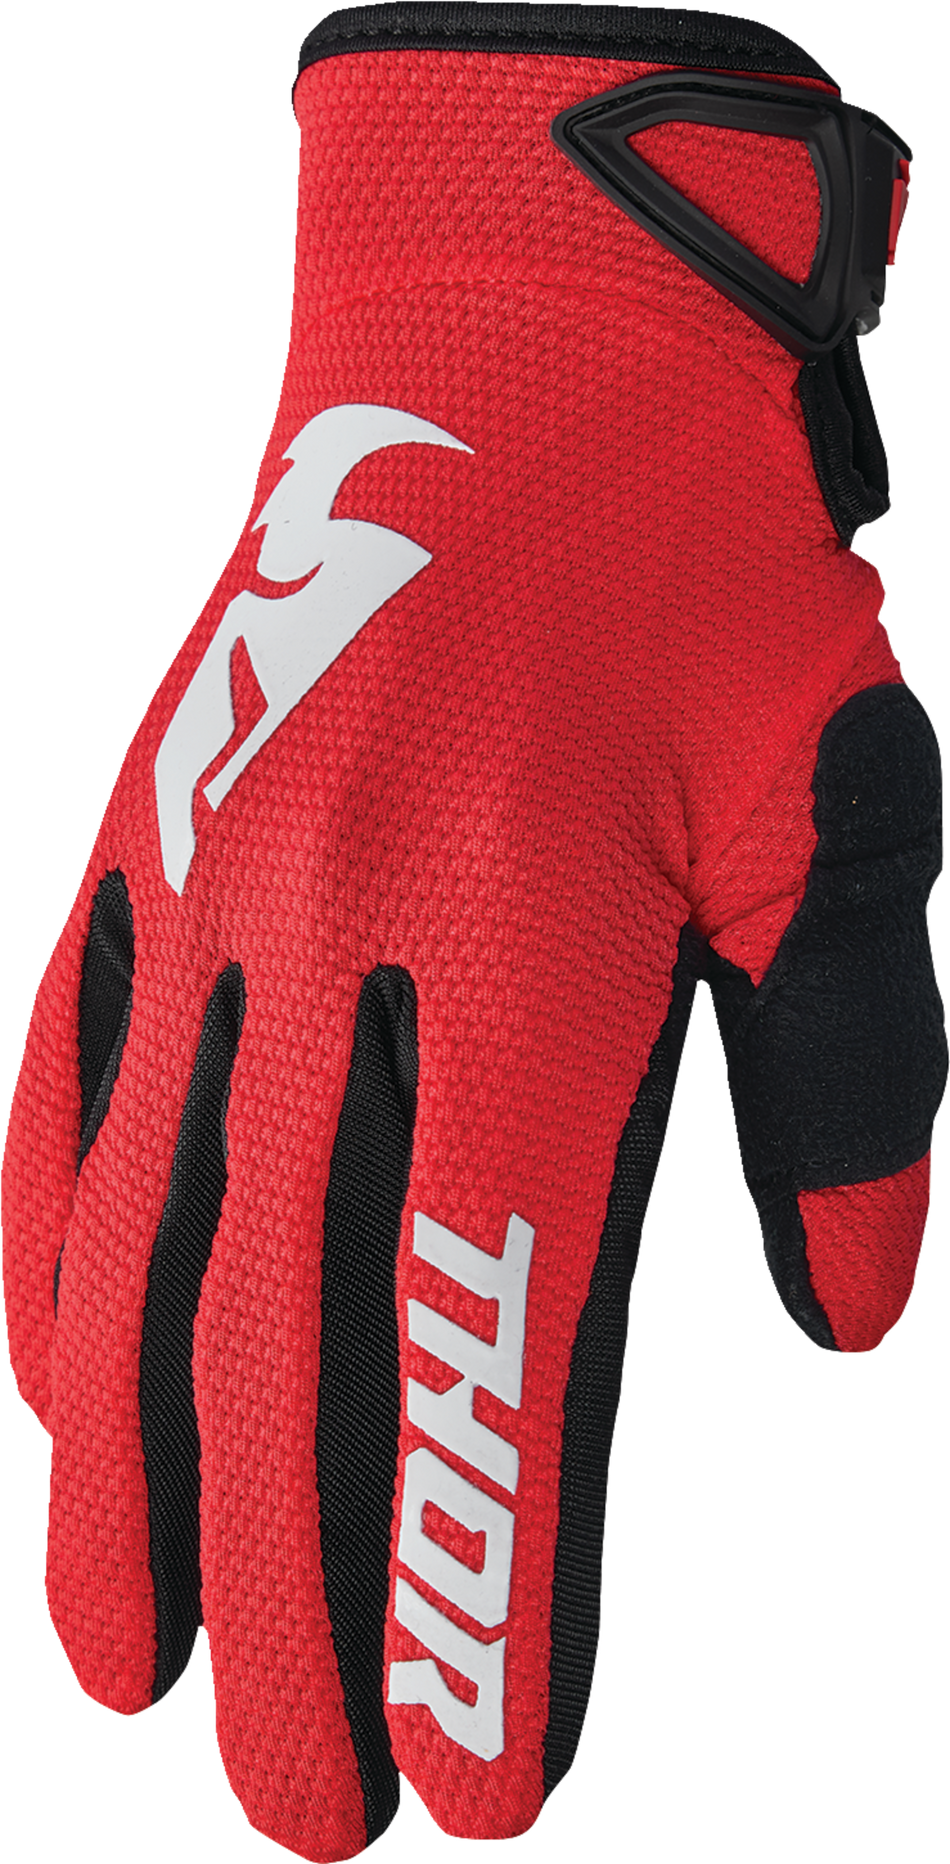 THOR Sector Gloves - Red/White - XL 3330-7271